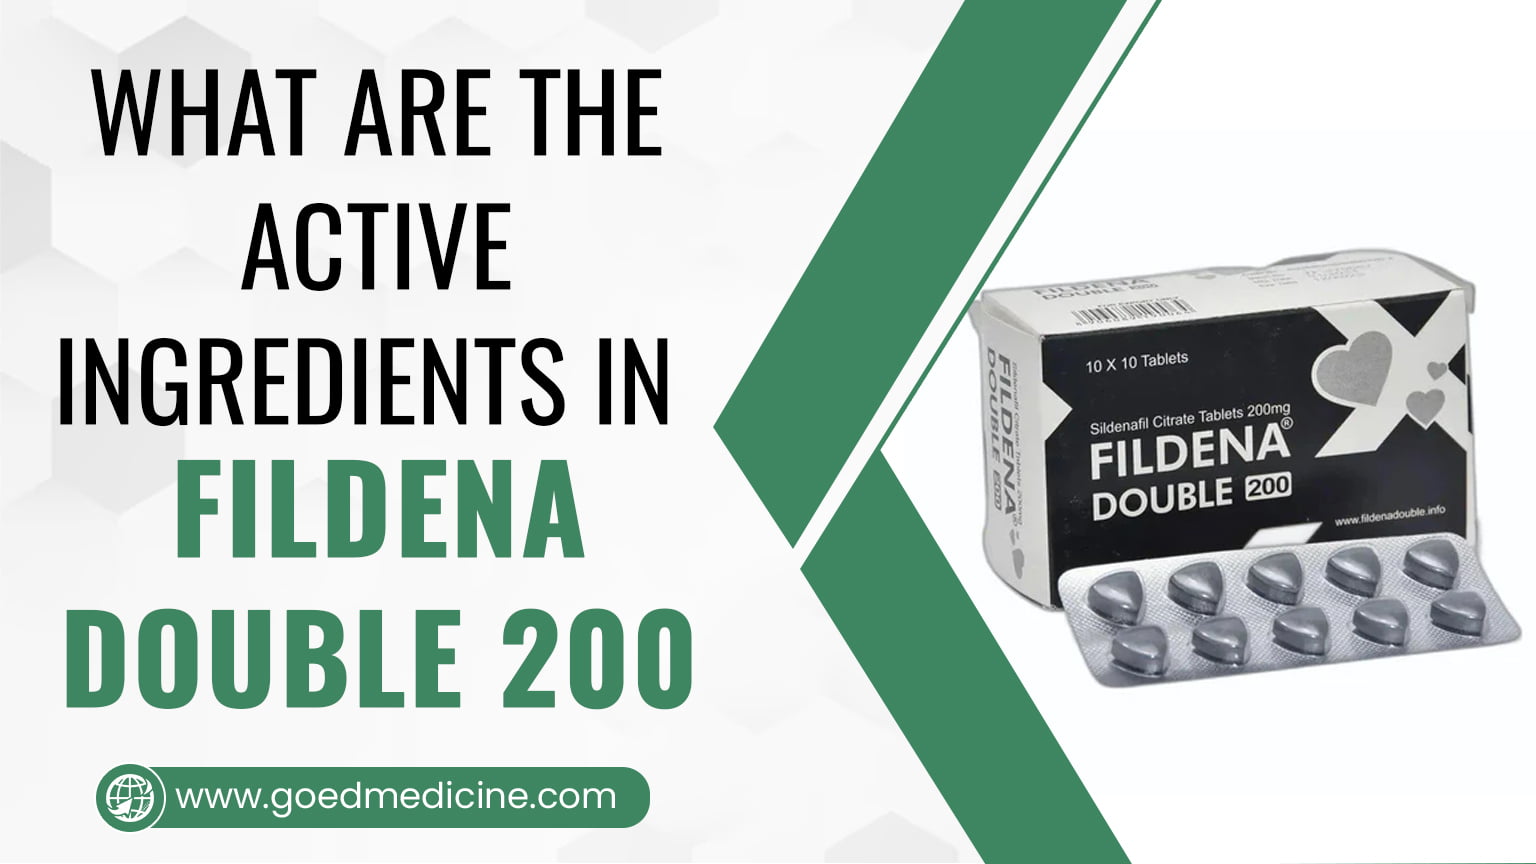 What are the active ingredients in Fildena Double 200